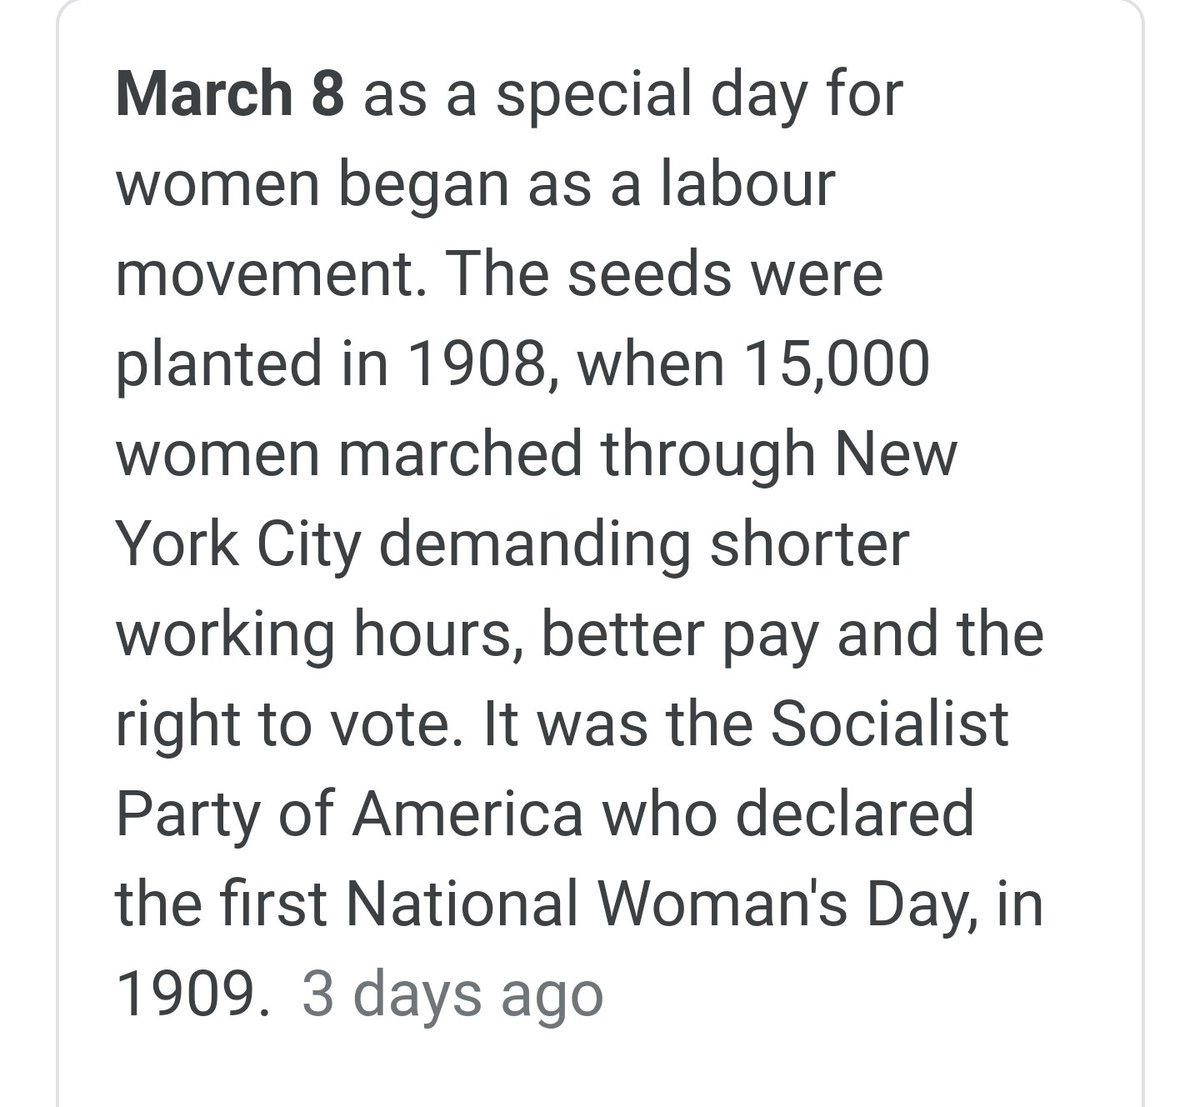 @shesmegg82 @bluedog1777 The woke turned it into a stupid day, historically it was started by my womens March for equal pay, shorter hours, and the vote in 1908. Today's women does very well and I too have never felt discriminated because I'm a woman.